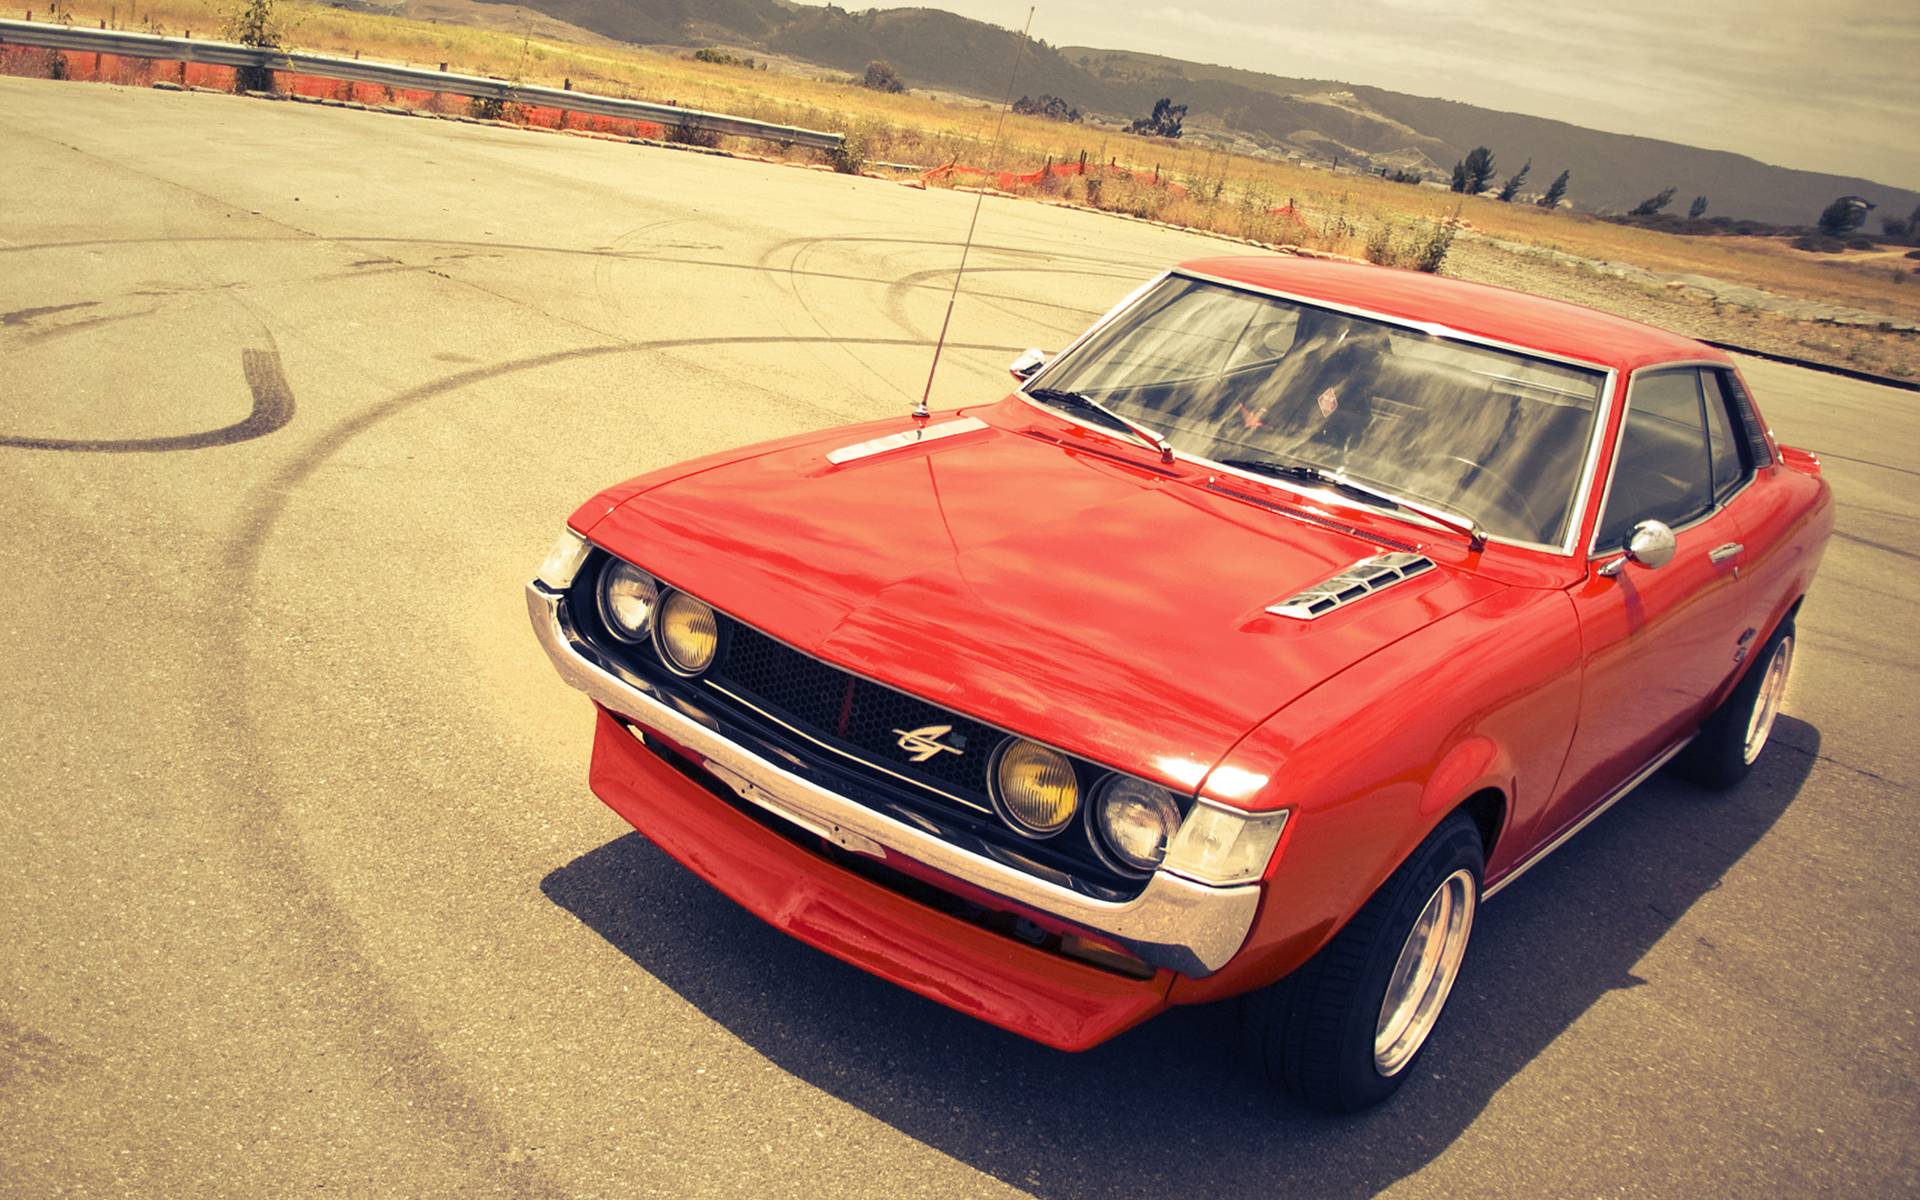 Toyota Celica Ta22 Gt Backgrounds on Wallpapers Vista